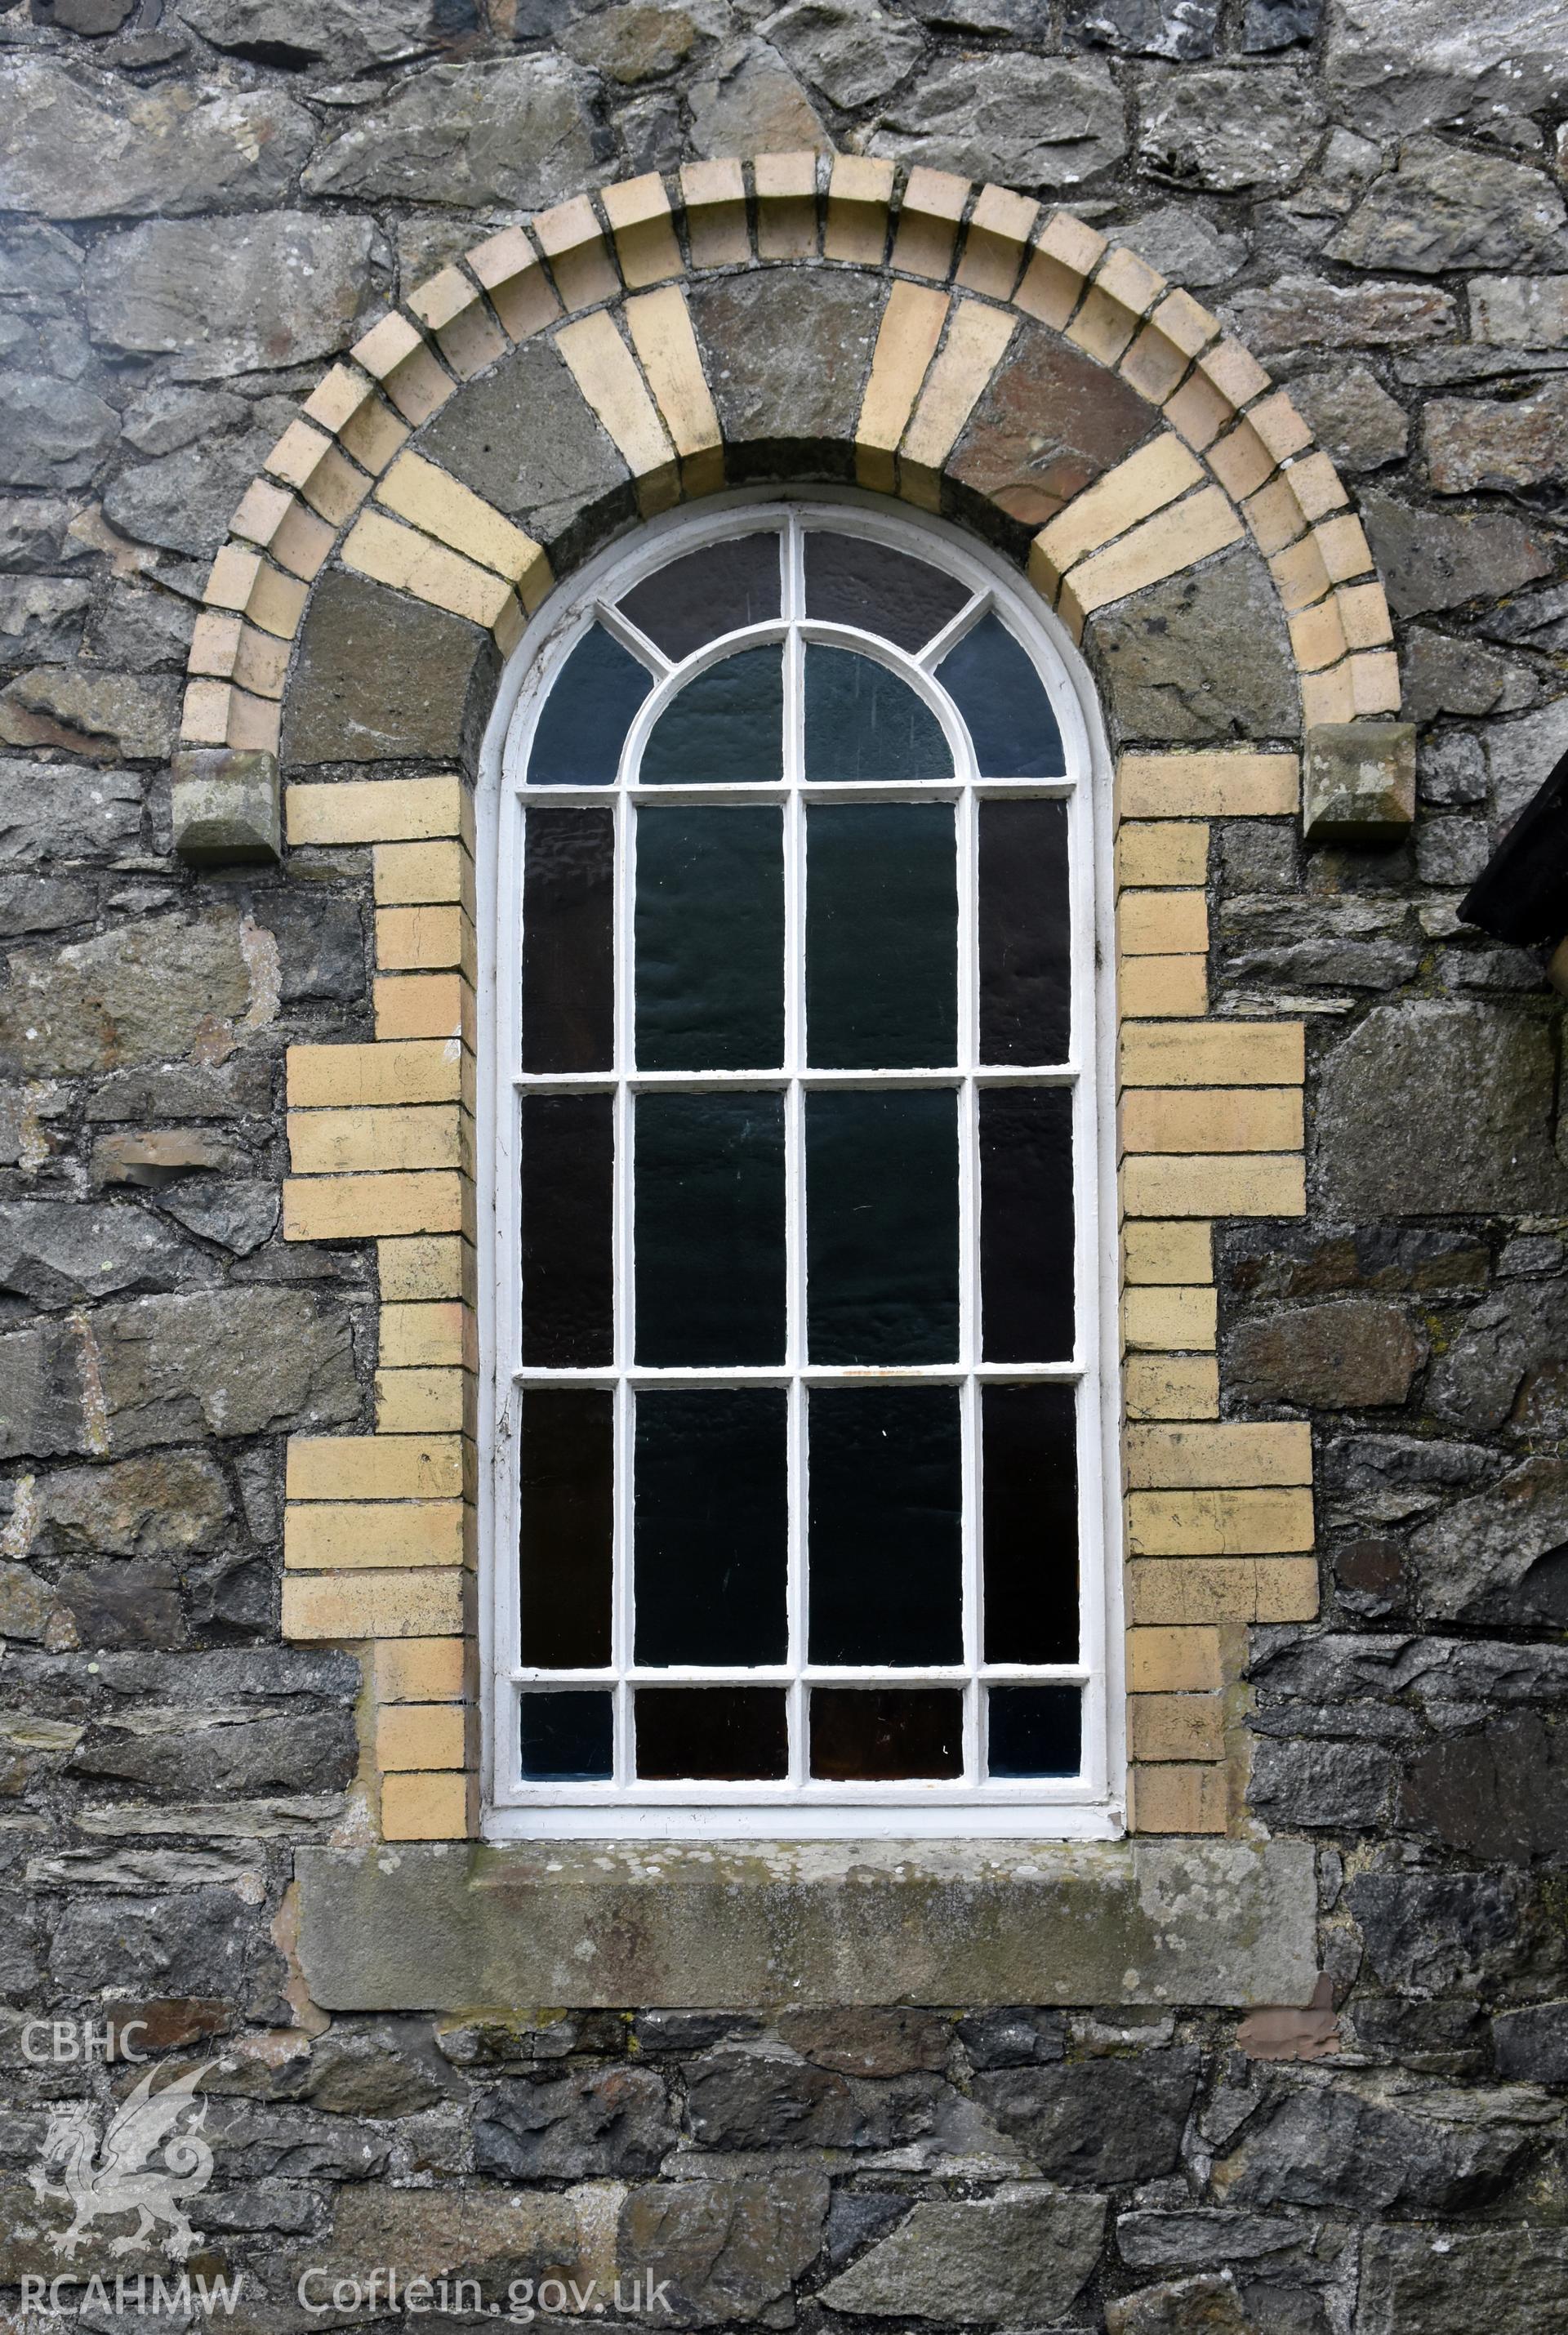 Exterior view of window and brick window arch at Hyssington Primitive Methodist Chapel, Hyssington, Churchstoke. Photographic survey conducted by Sue Fielding on 7th December 2018.